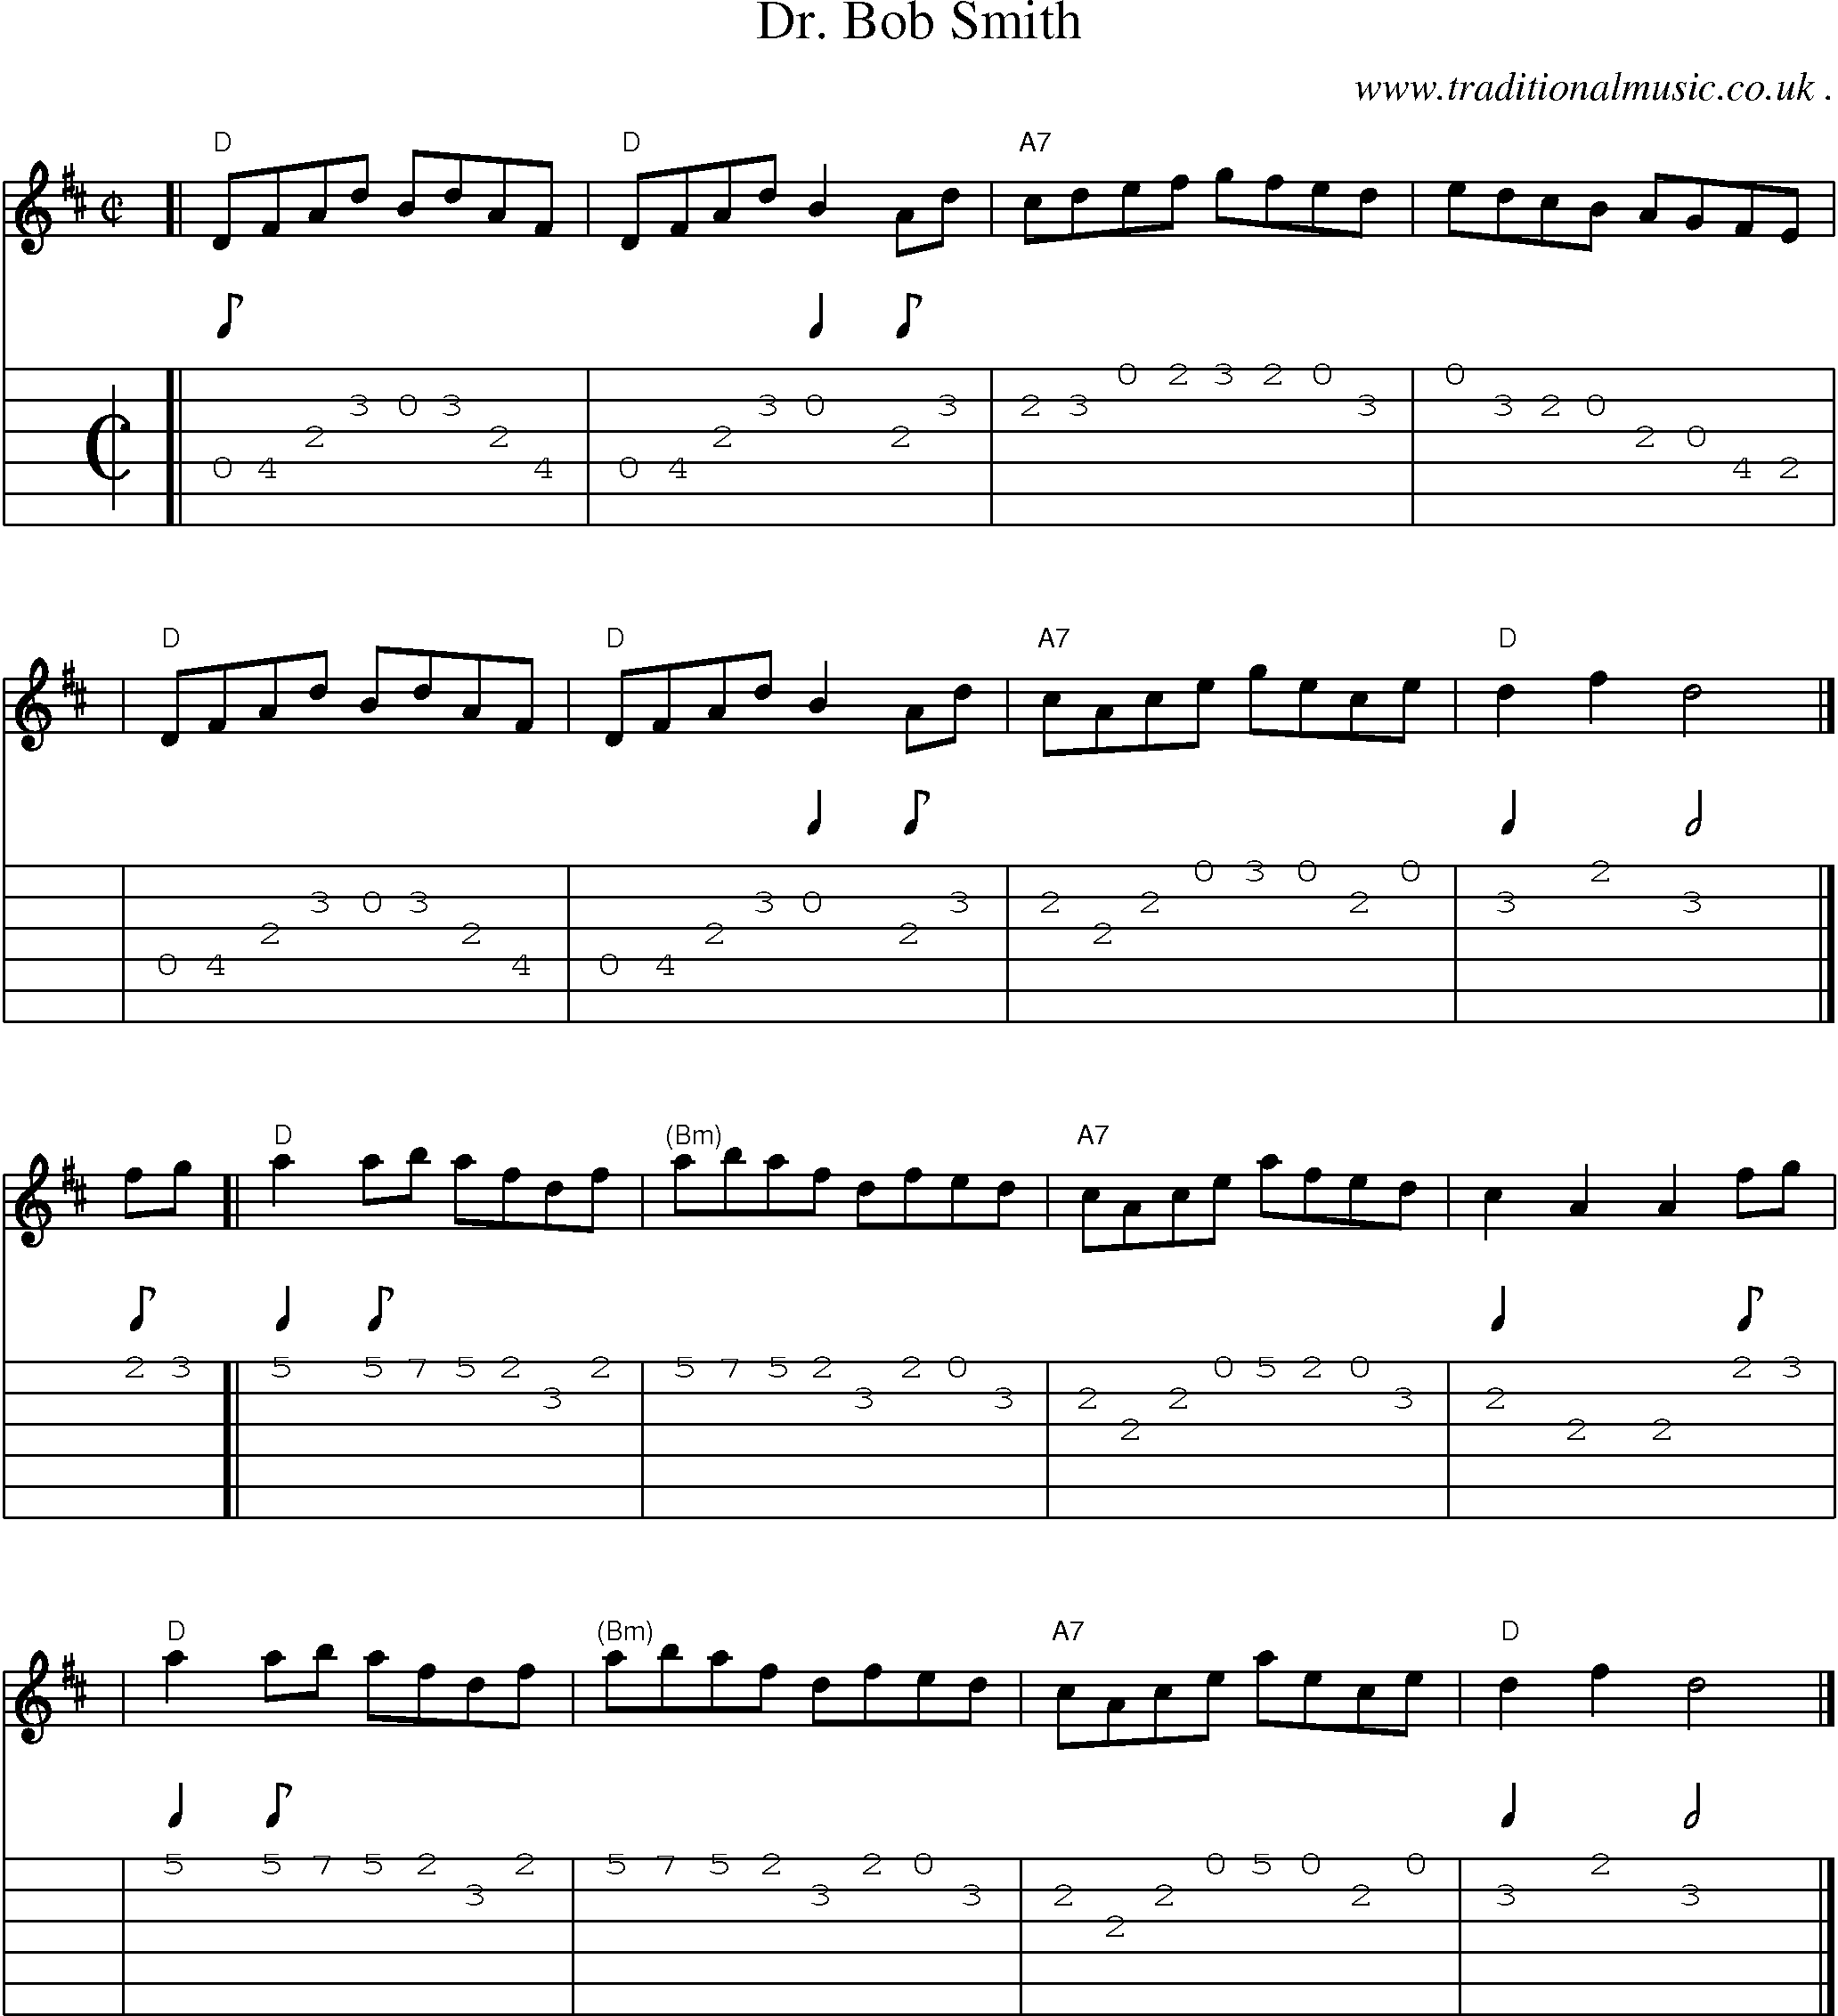 Sheet-music  score, Chords and Guitar Tabs for Dr Bob Smith